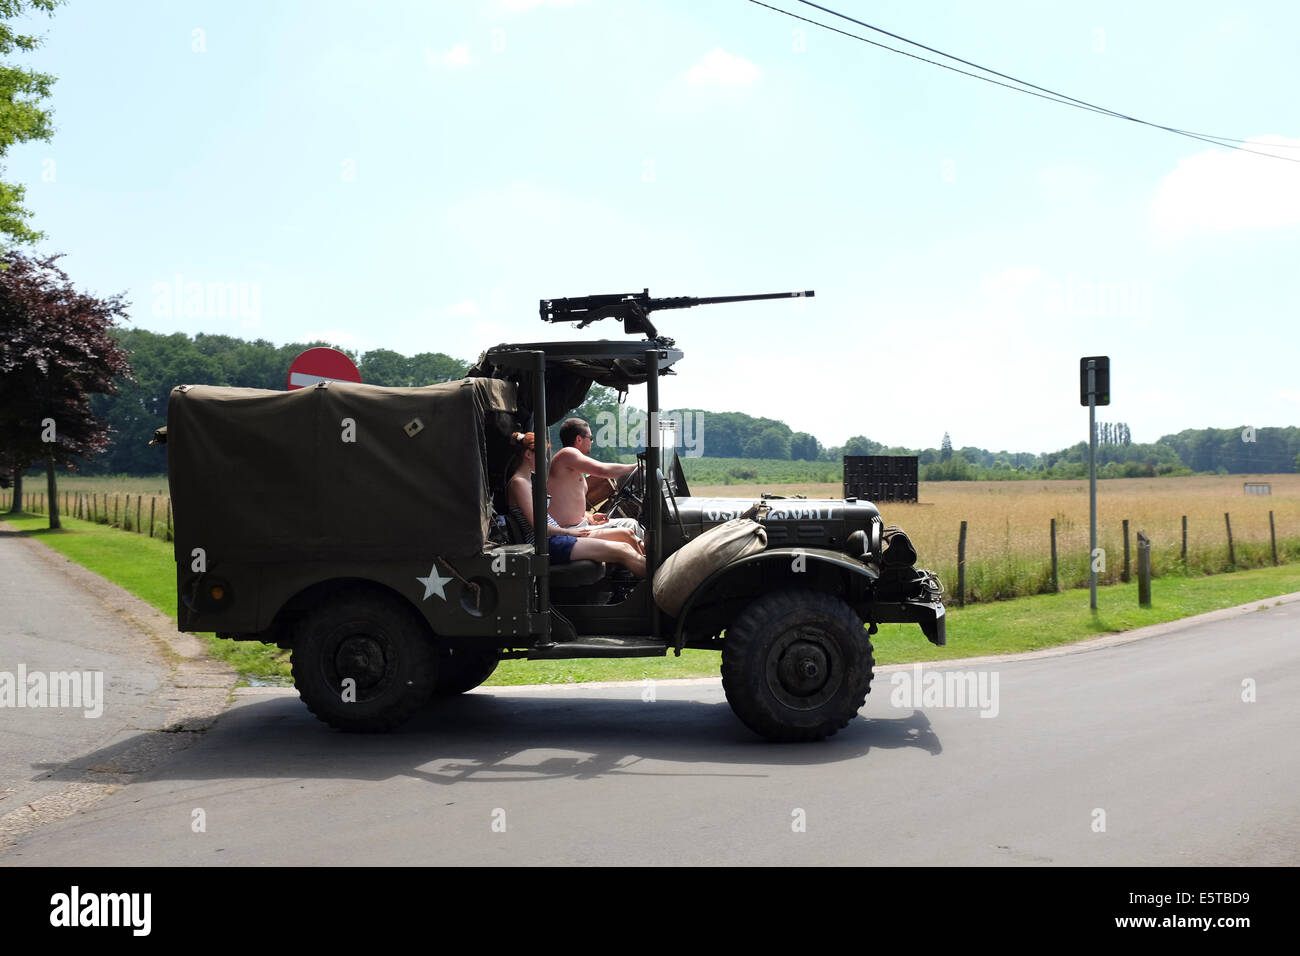 Ex-USA Army jeep with its current owners, Limburg Province, Belgium Stock Photo